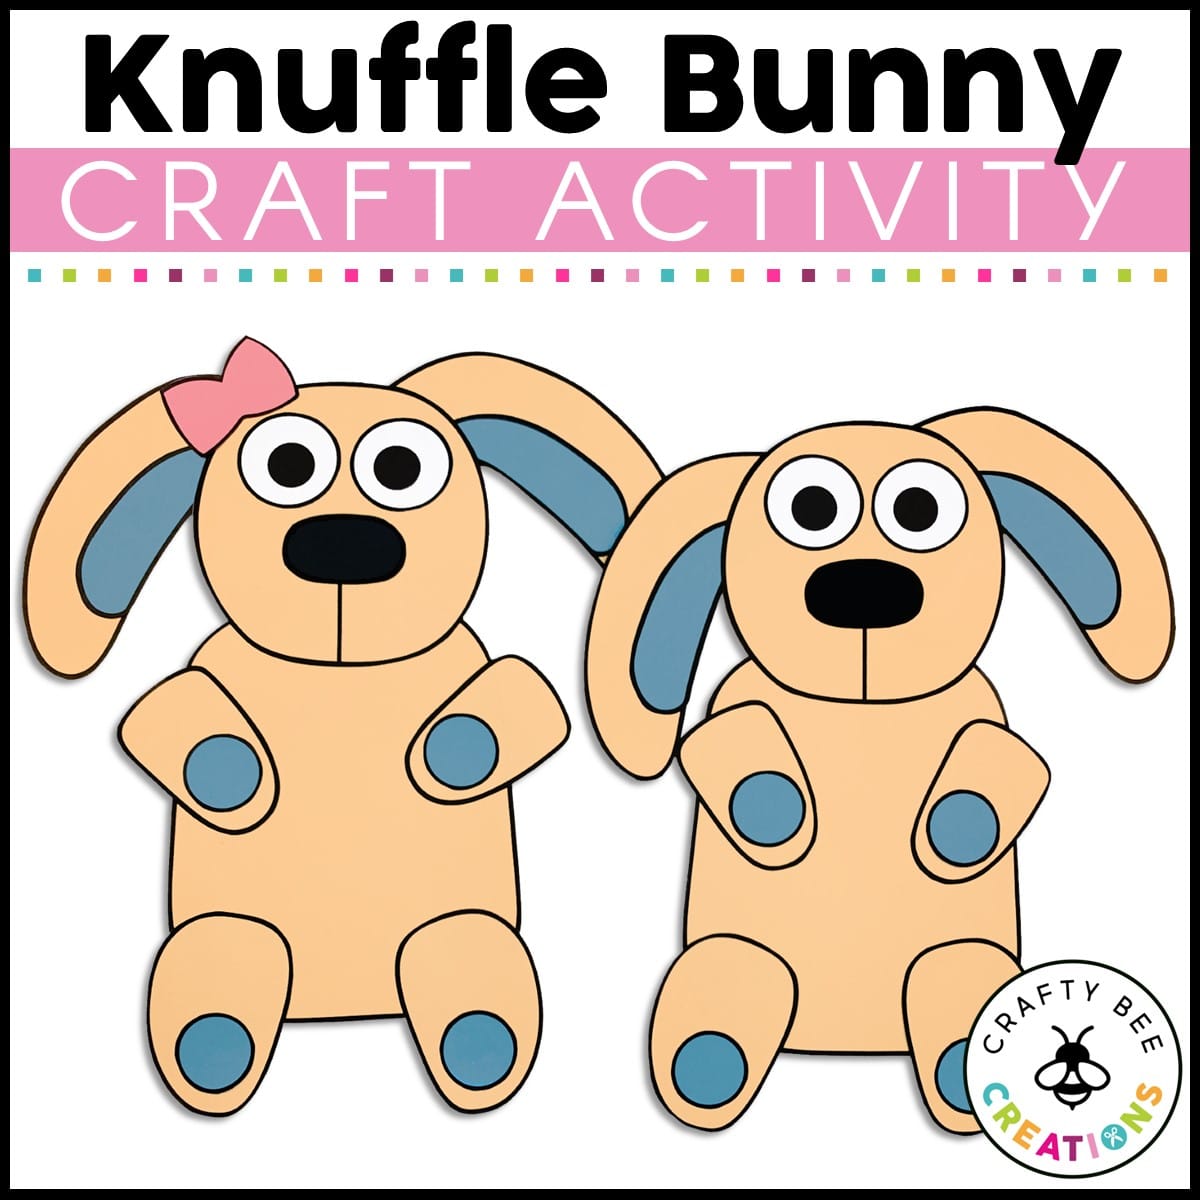 What Is The Theme Of Knuffle Bunny